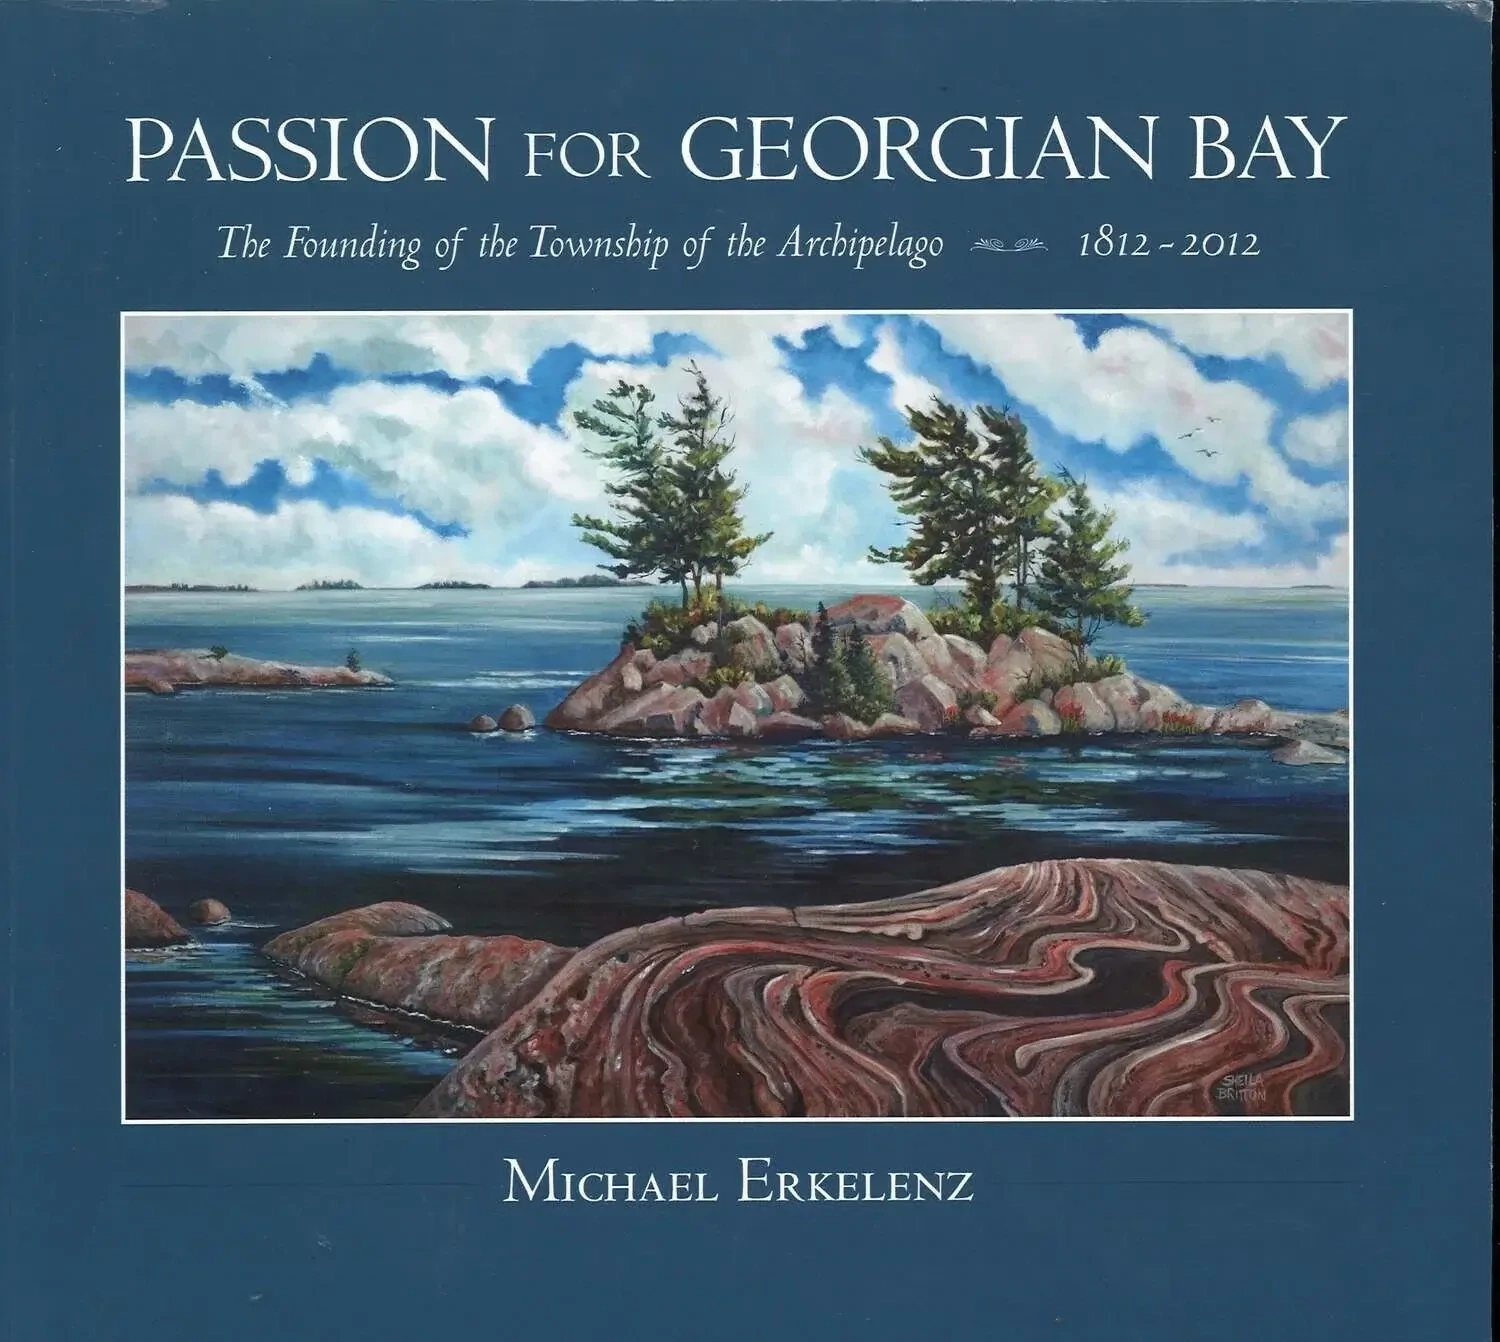 Passion for Georgian Bay by Michael Erkelenz